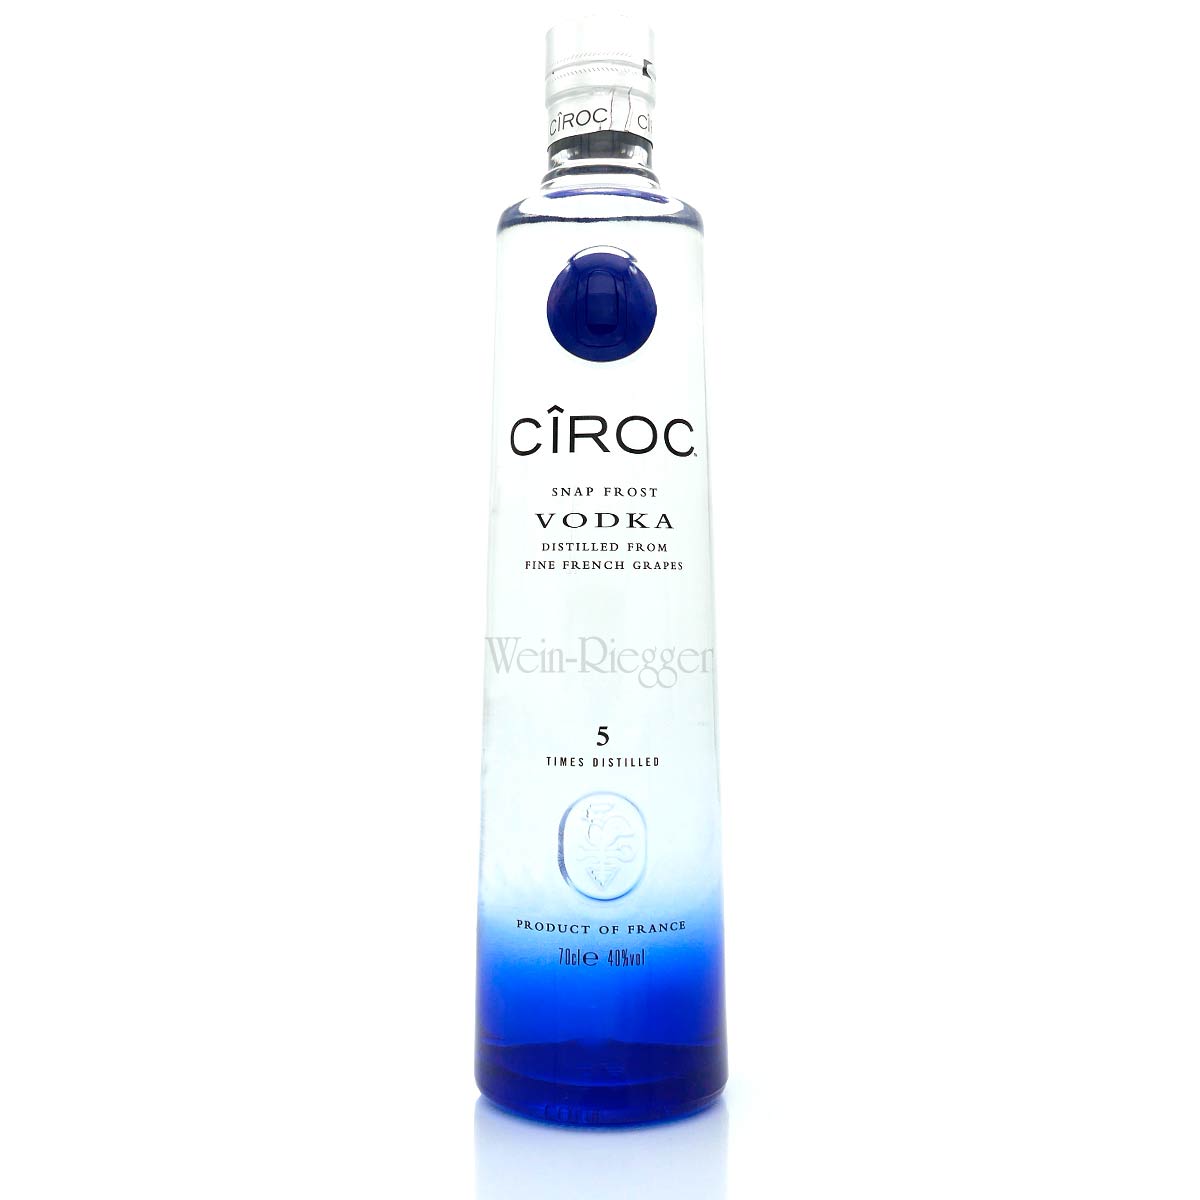 Ciroc Vodka - Snap Frost Vodka From French Grapes